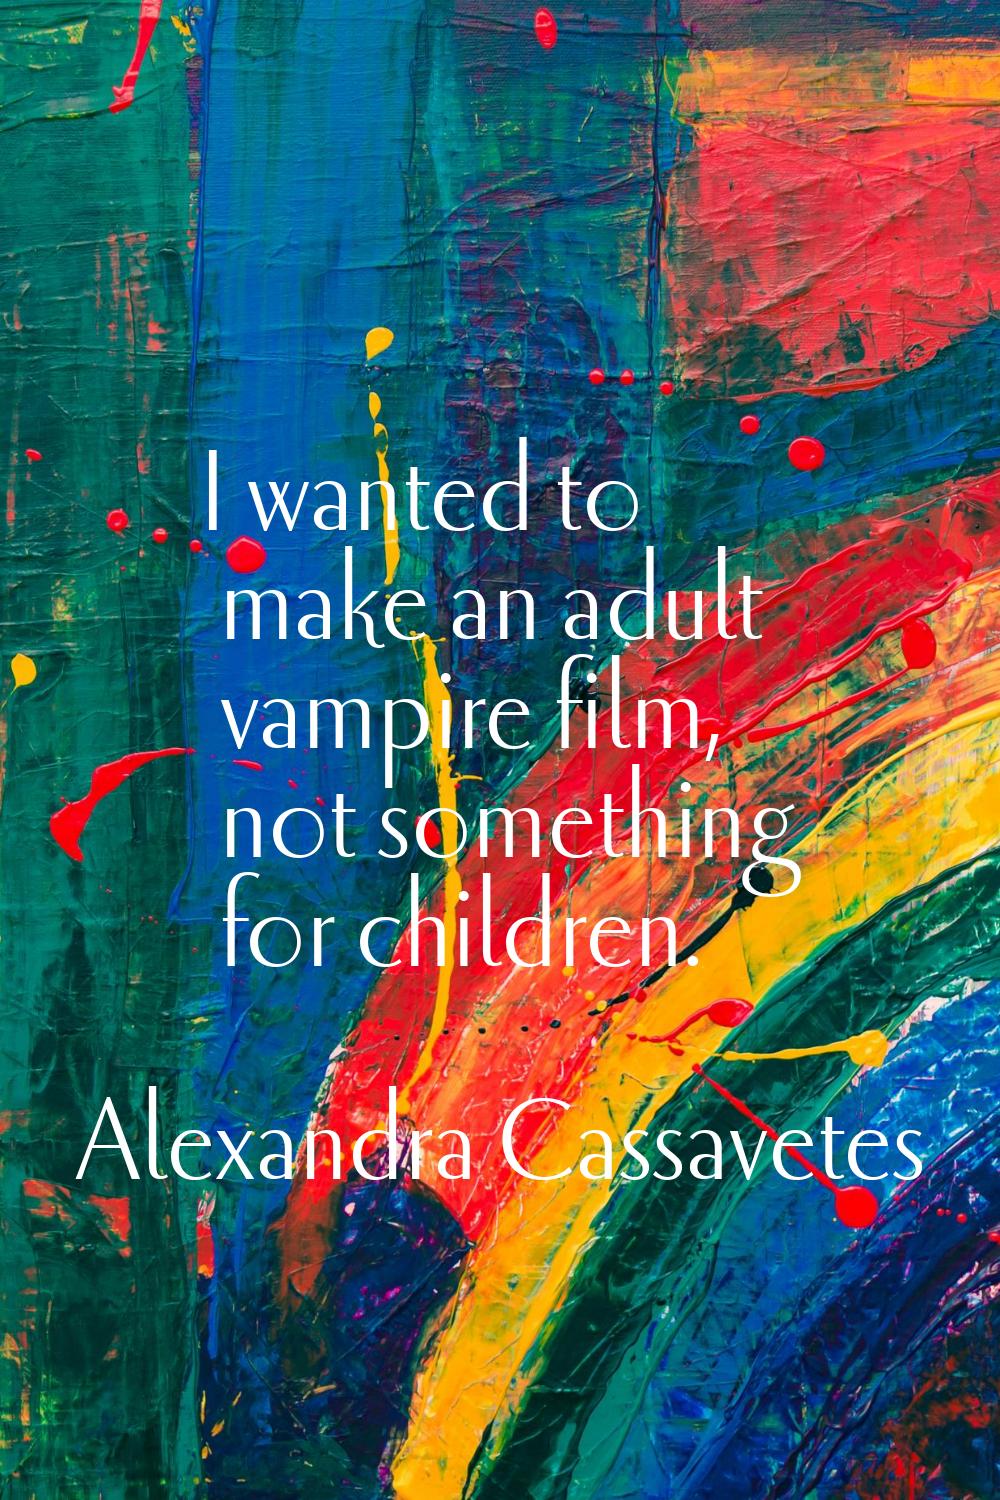 I wanted to make an adult vampire film, not something for children.